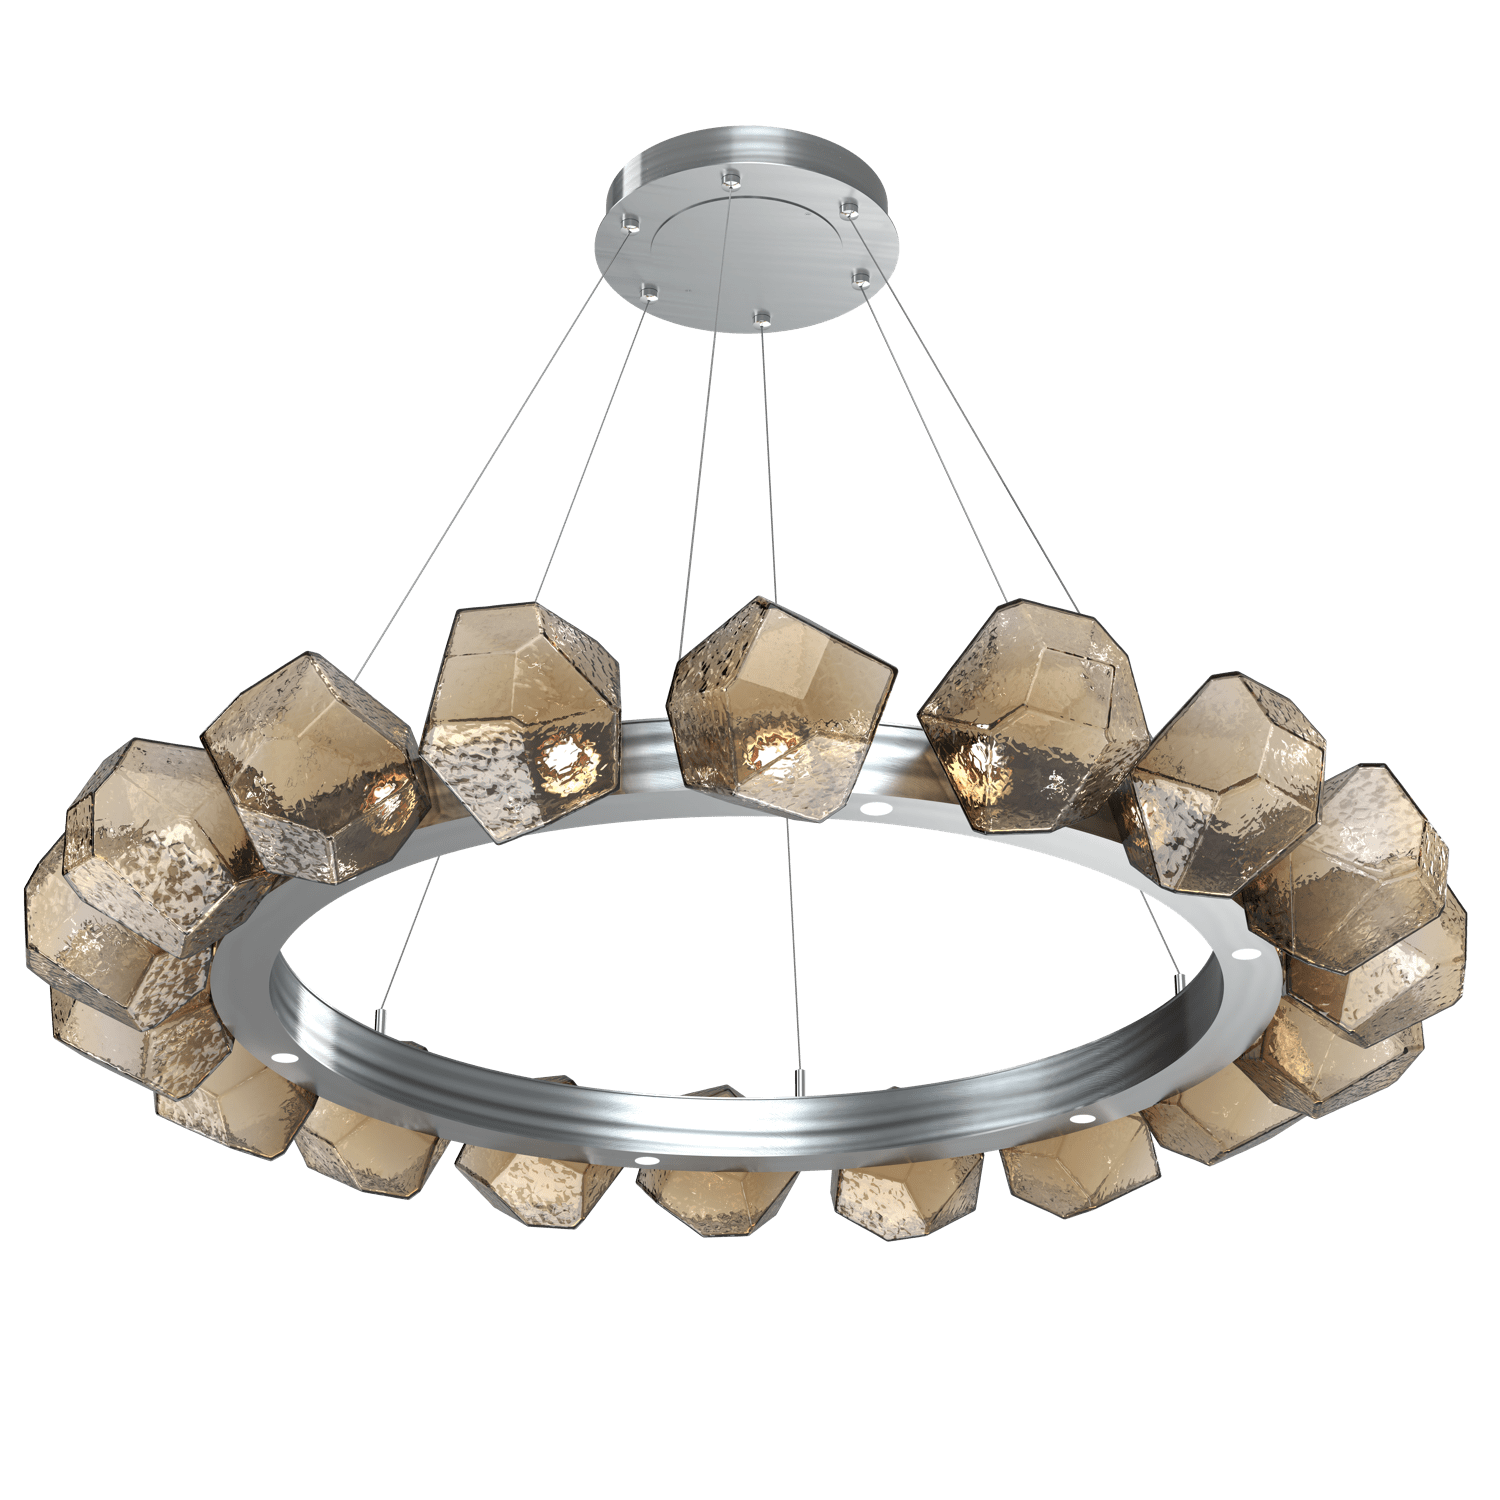 CHB0039-48-SN-B-Hammerton-Studio-Gem-48-inch-radial-ring-chandelier-with-satin-nickel-finish-and-bronze-blown-glass-shades-and-LED-lamping